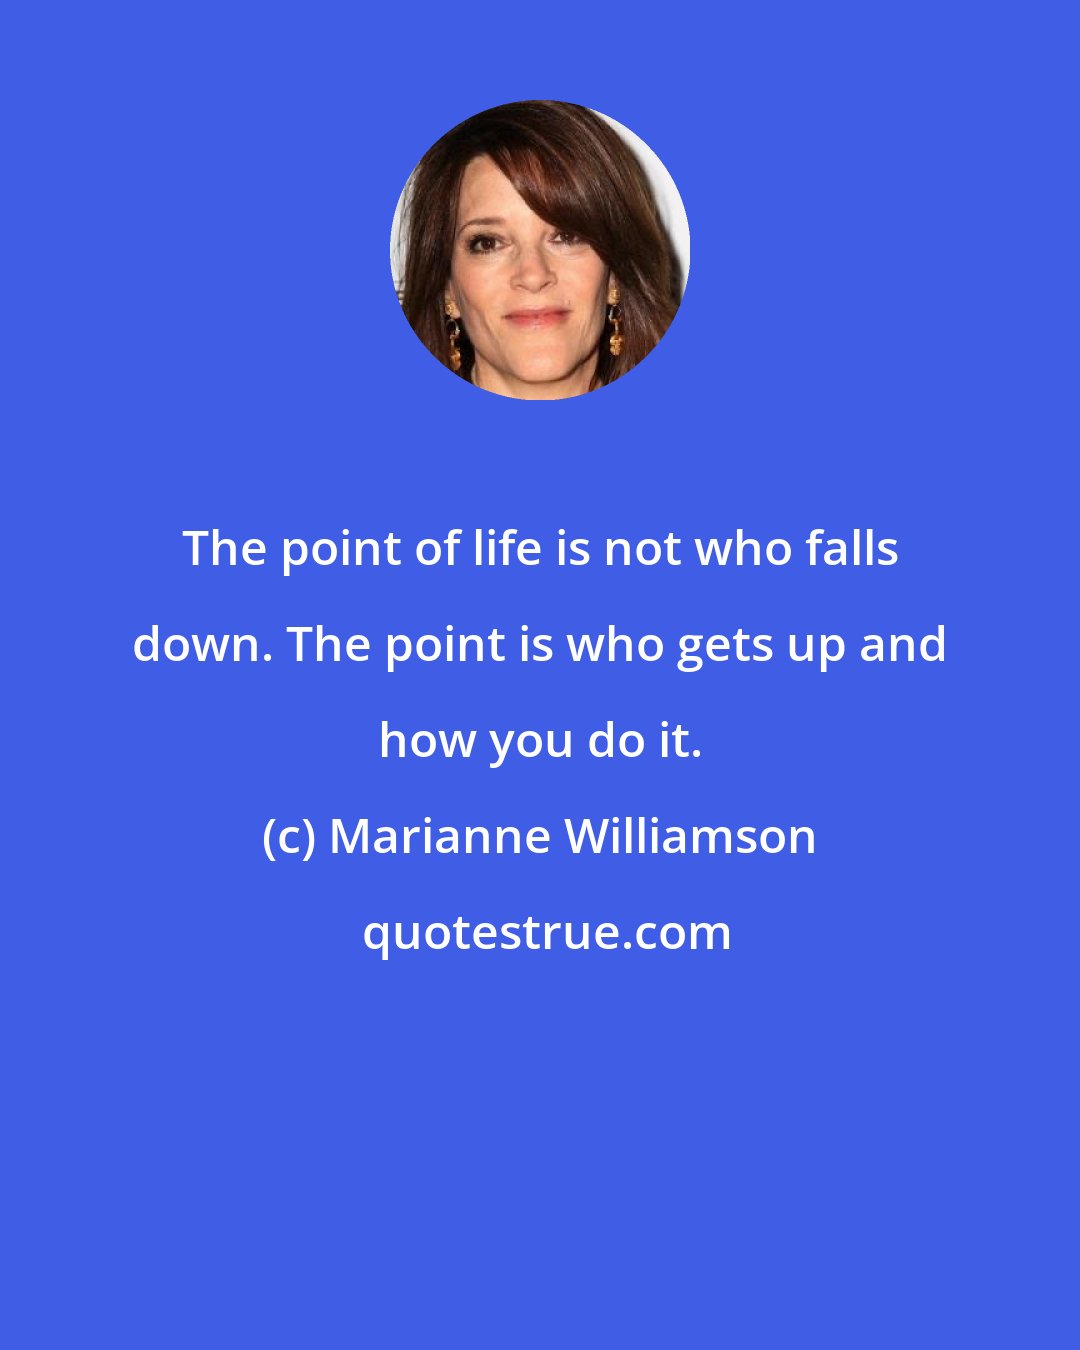 Marianne Williamson: The point of life is not who falls down. The point is who gets up and how you do it.